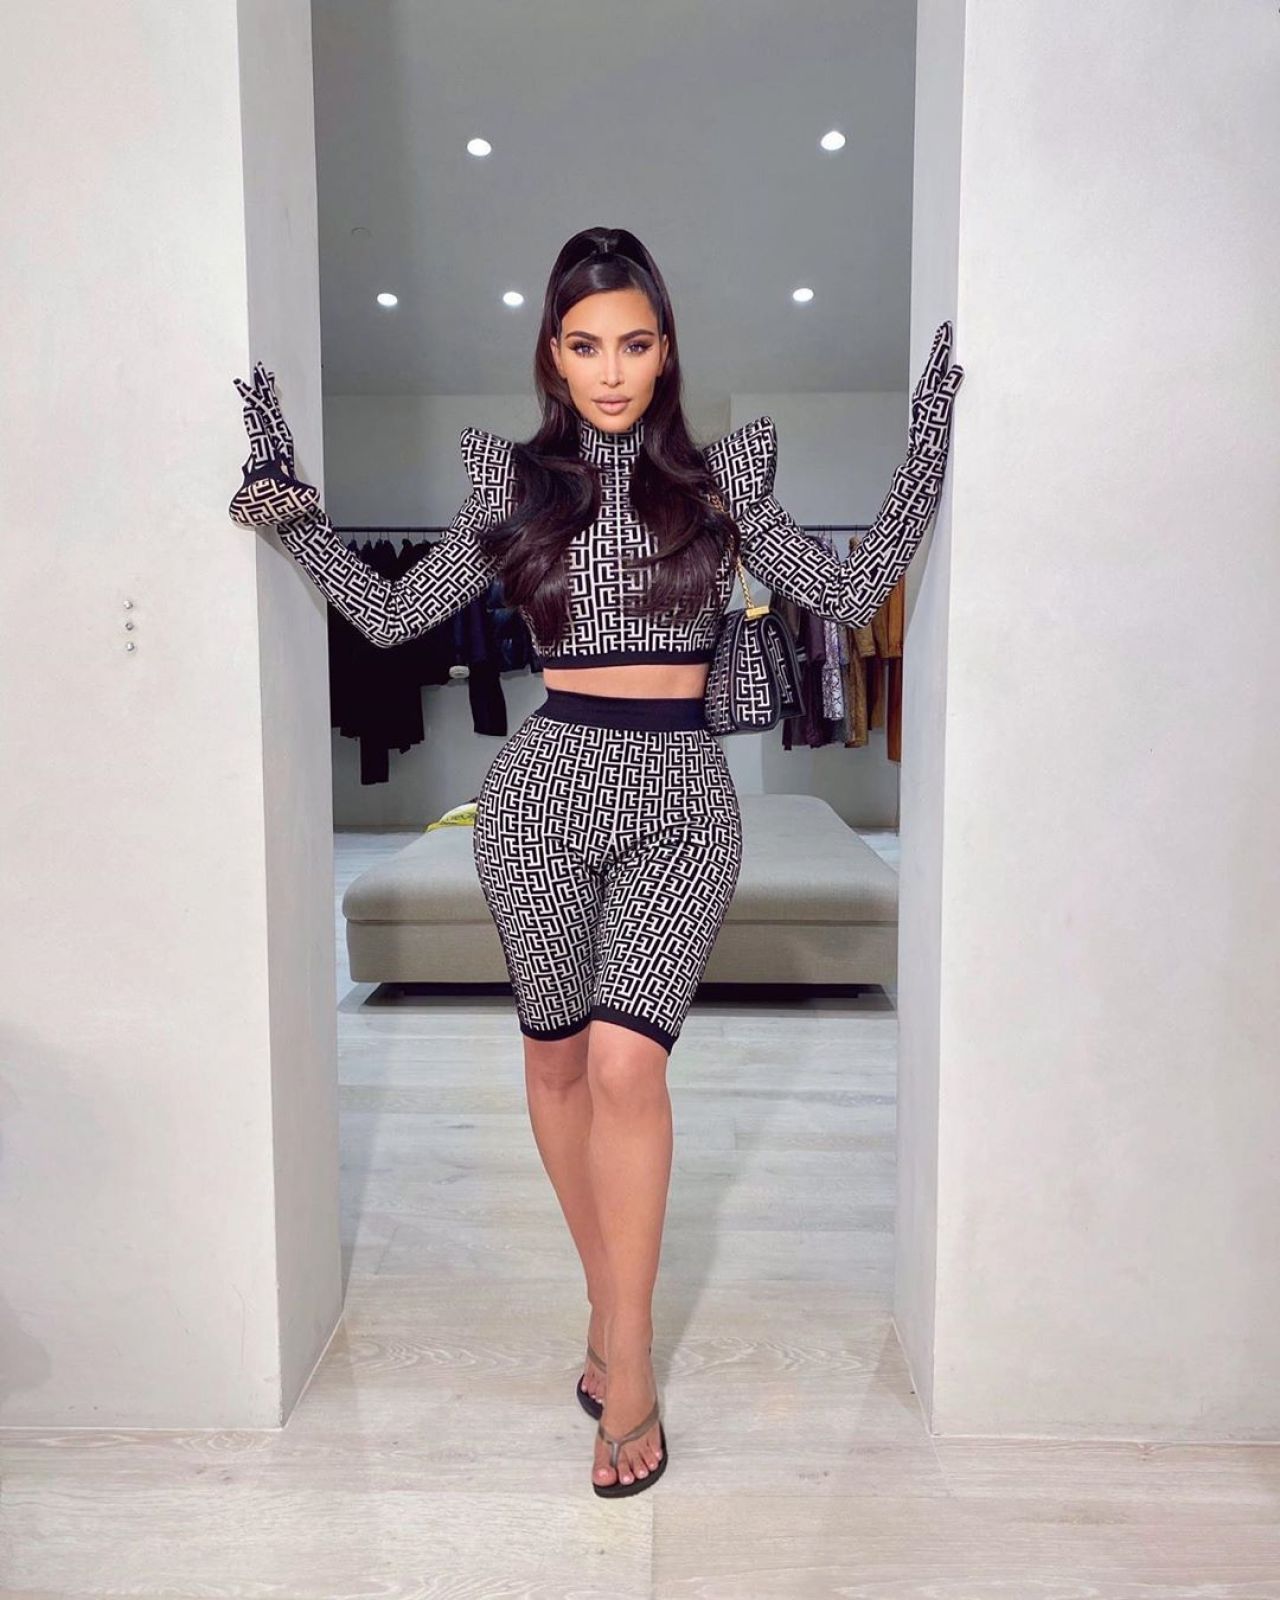 Kim Kardashian Stuns in Show-Stopping Outfit: Instagram’s Latest ...